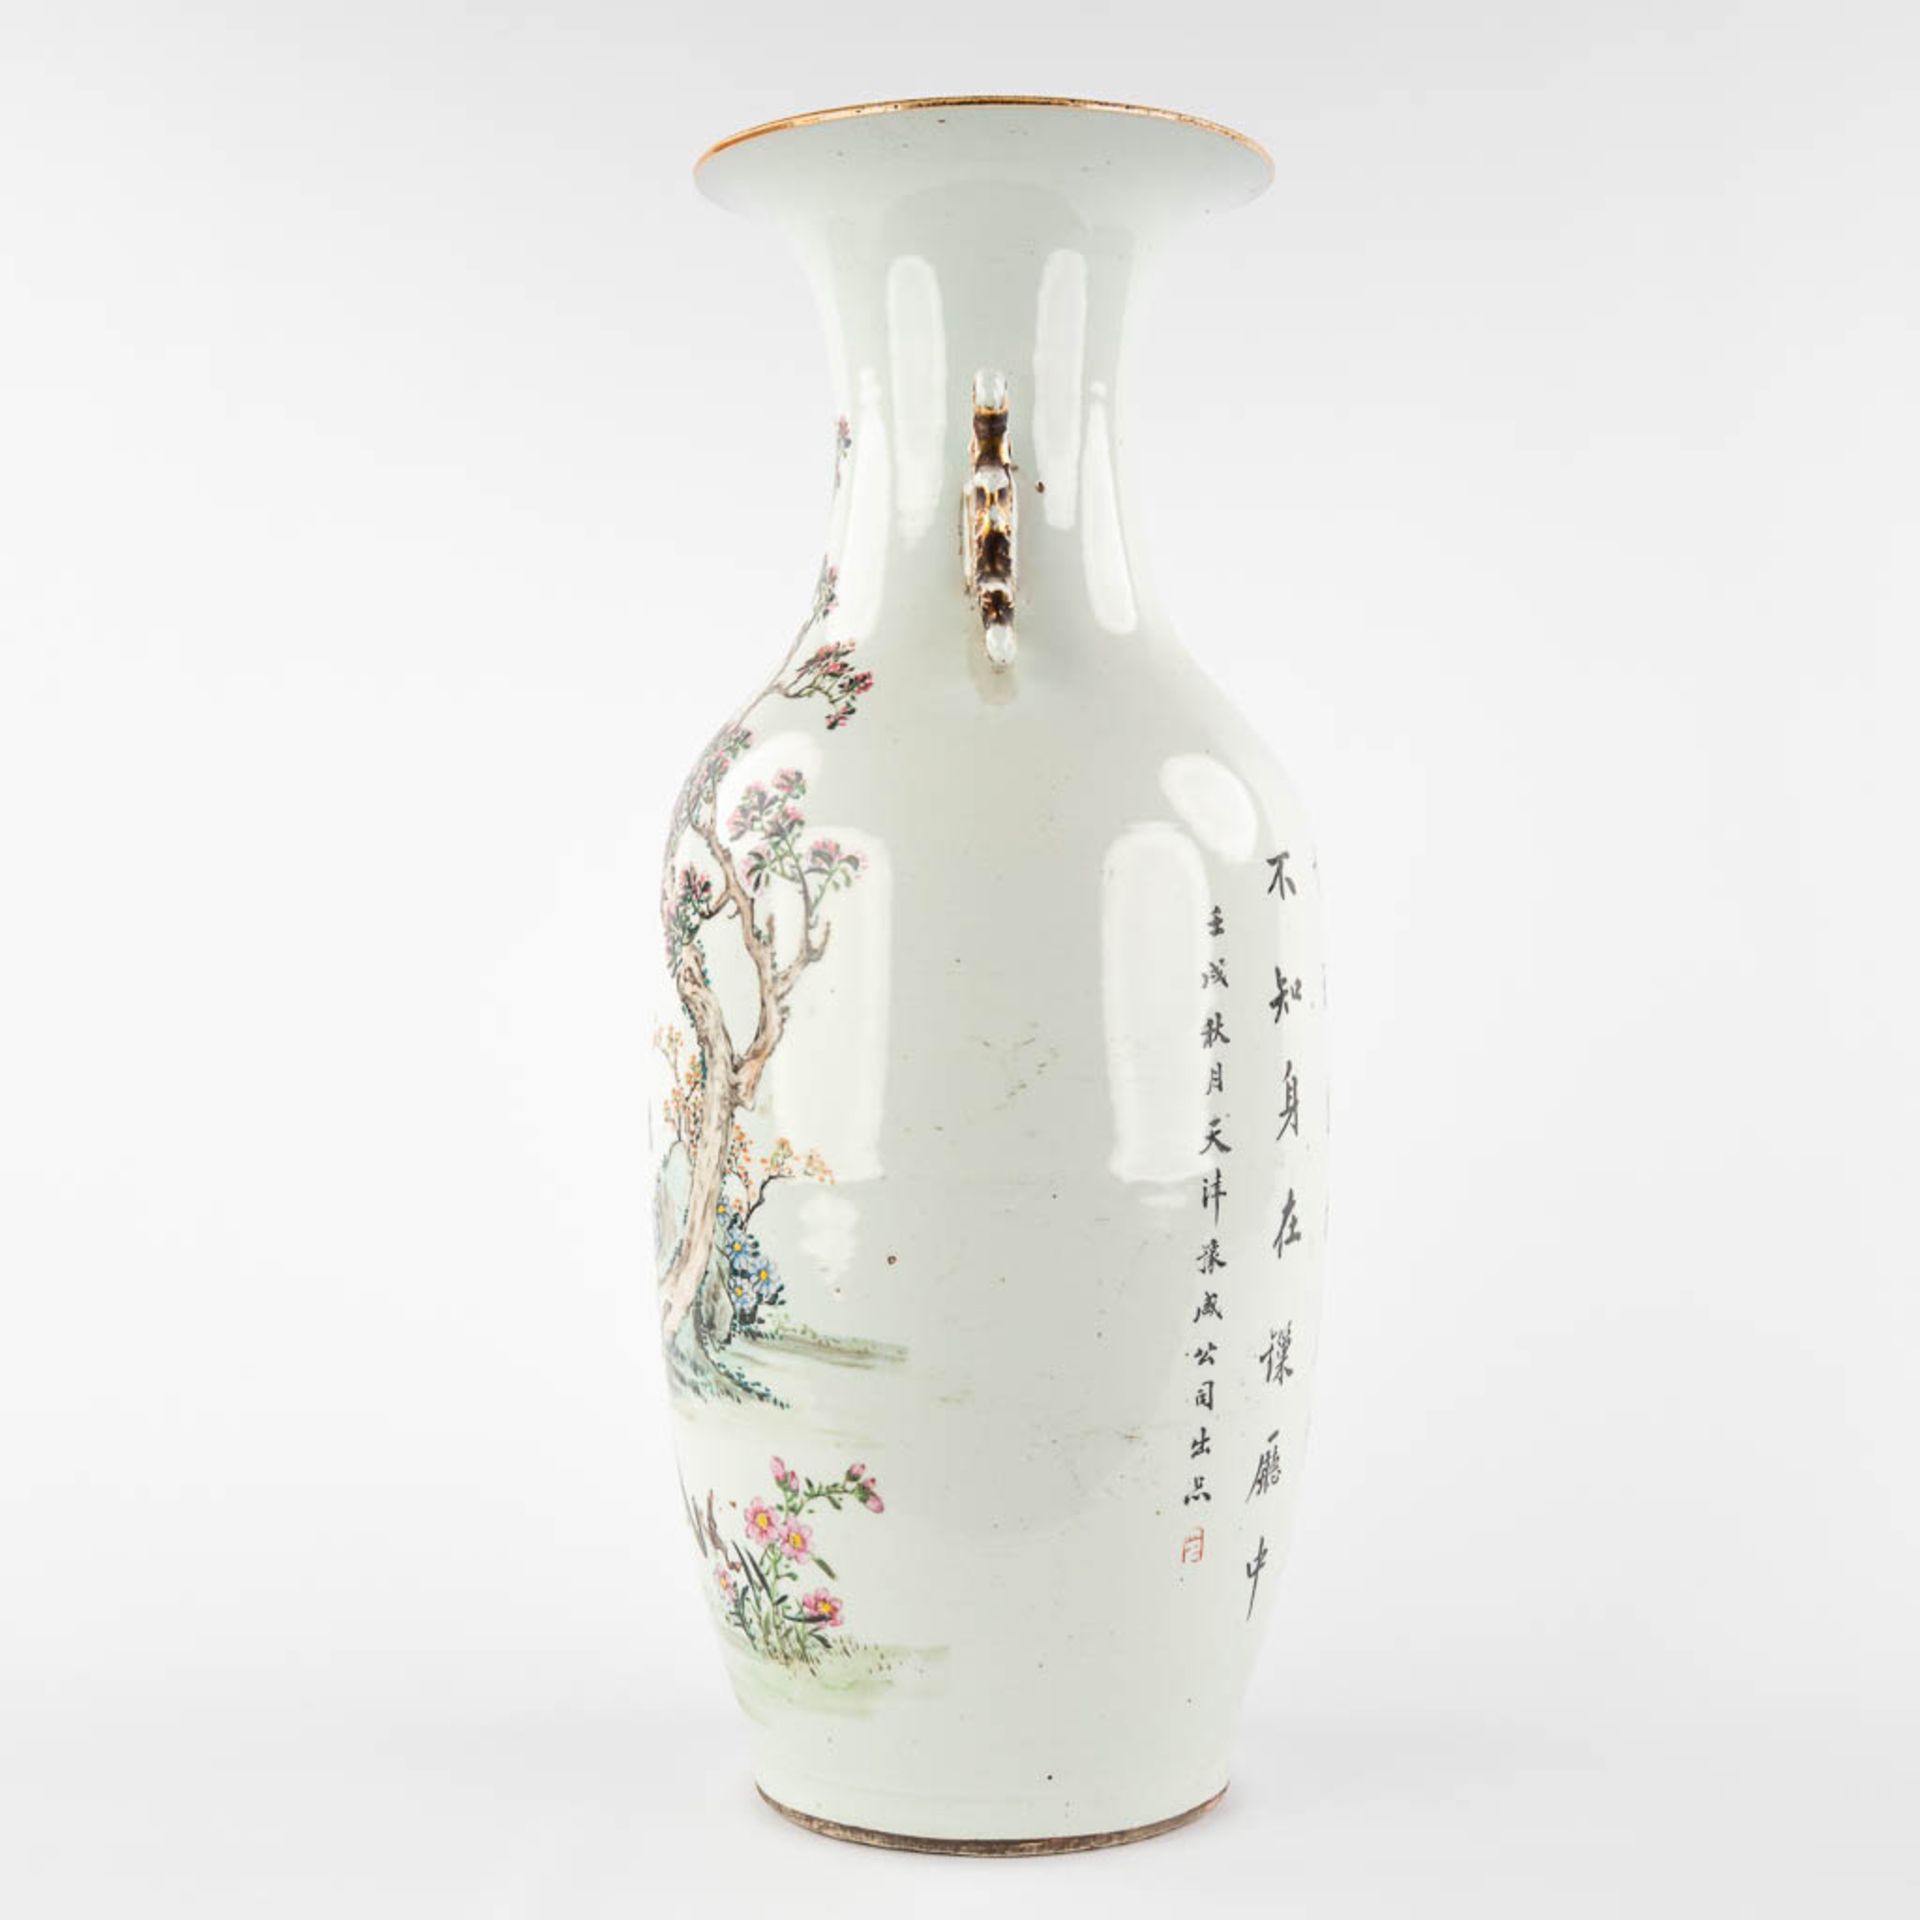 A Chinese vase decorated with ladies and calligraphic texts. 19th/20th C. (H:58 x D:22 cm) - Image 6 of 12